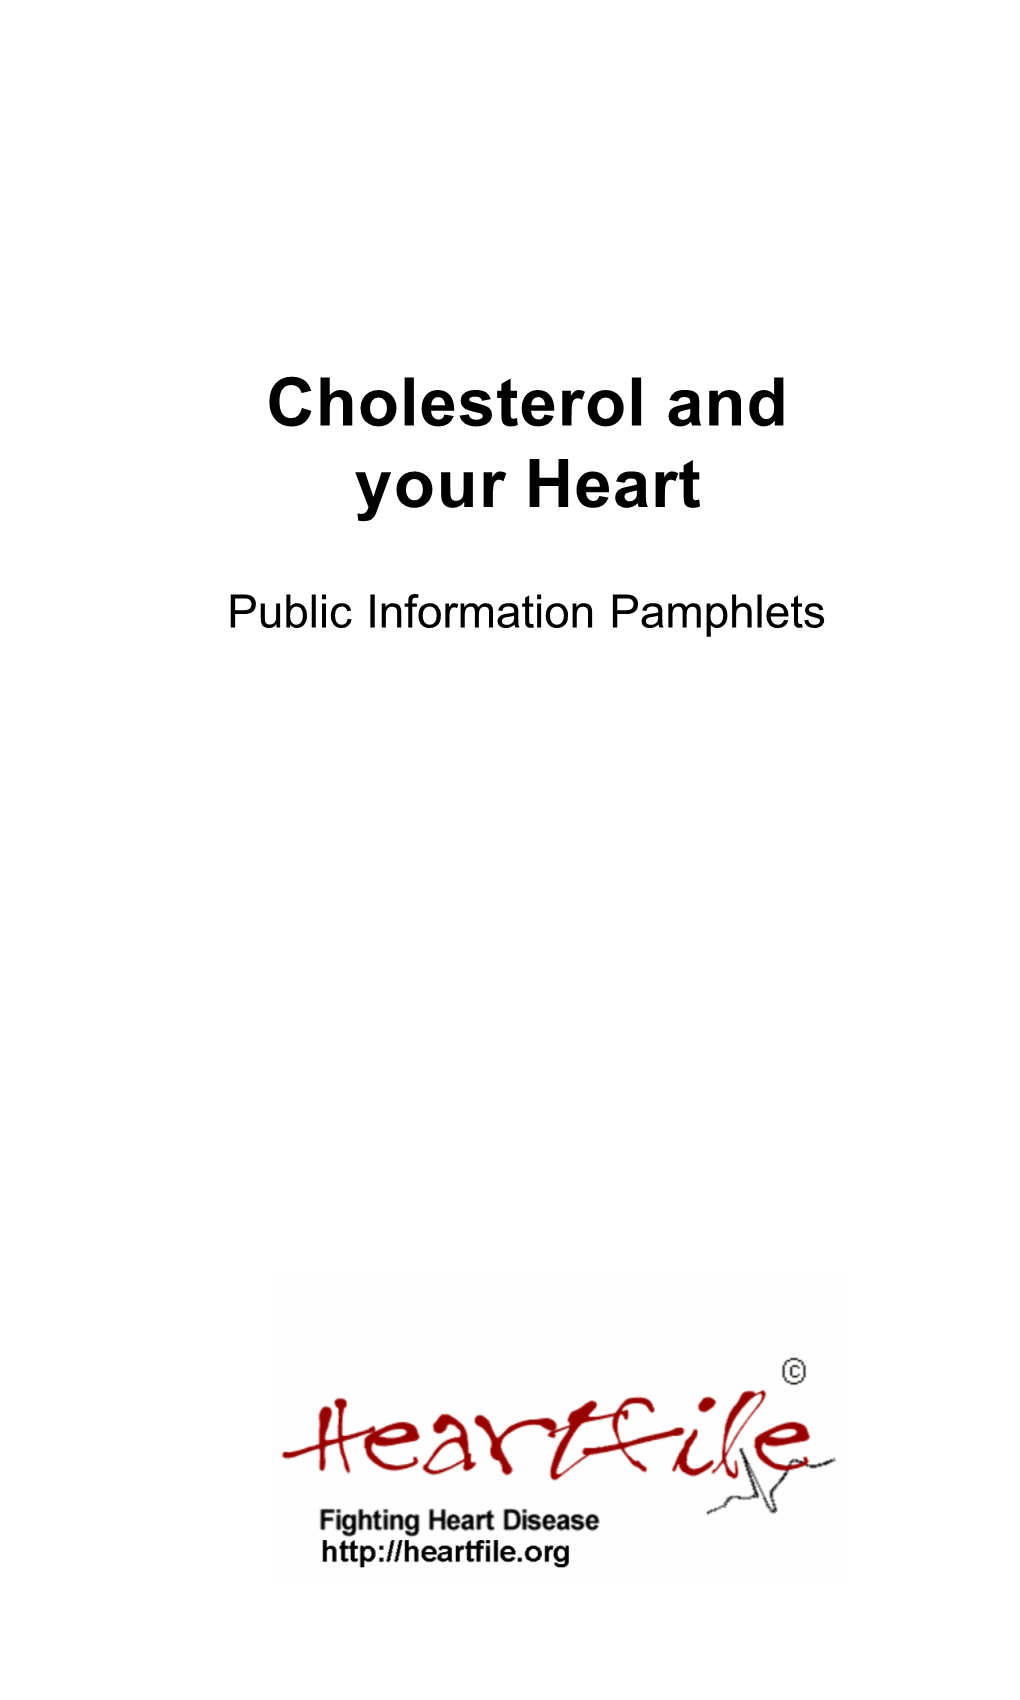 Cholesterol and Your Heart